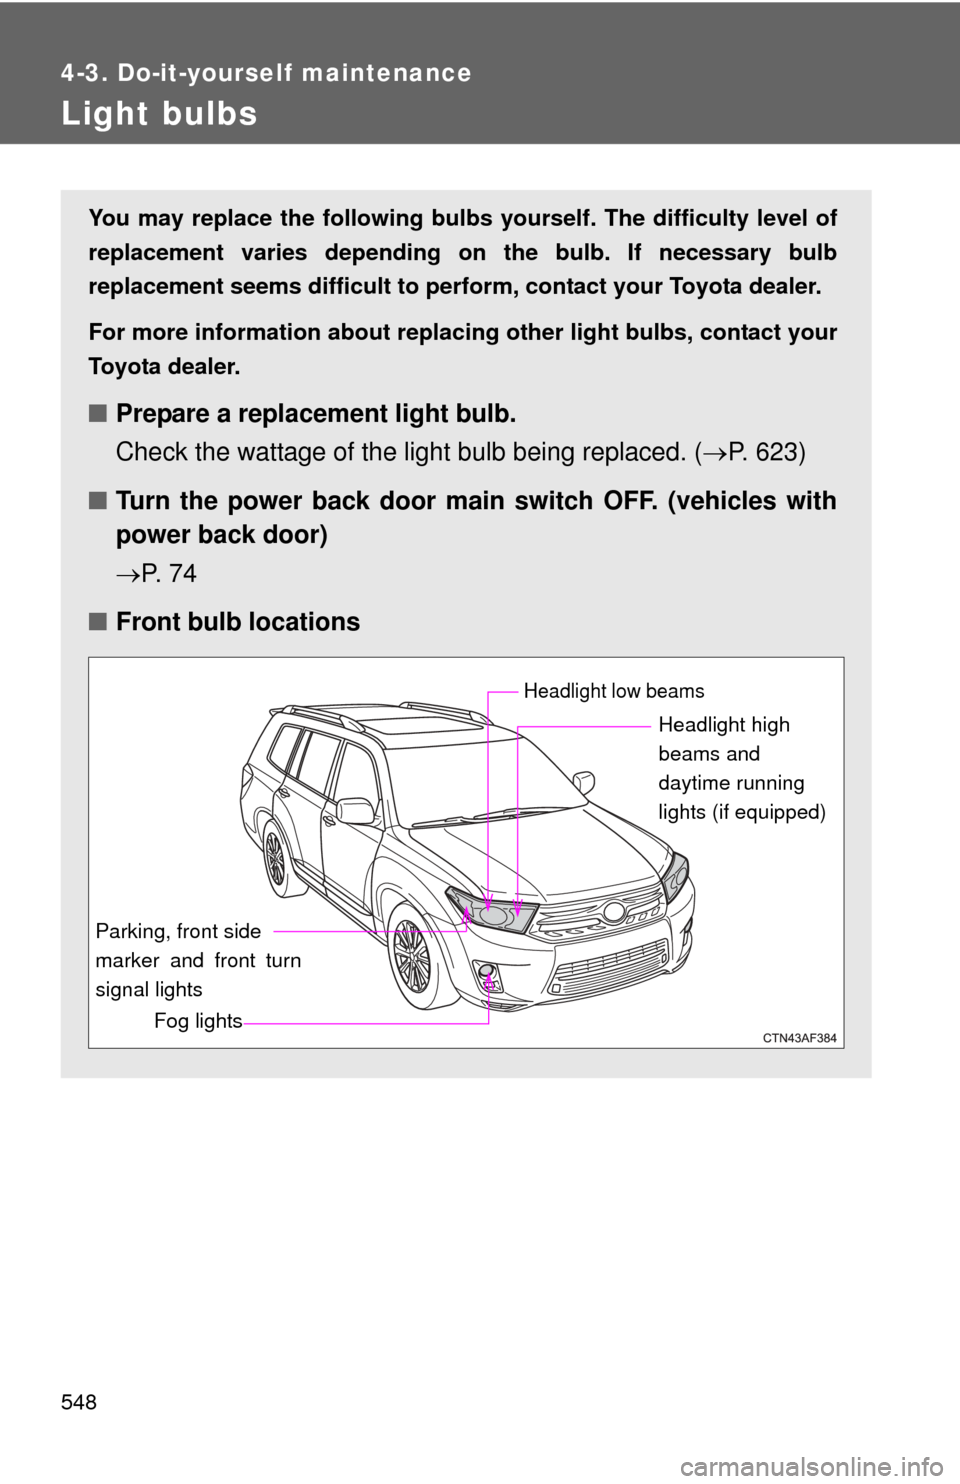 TOYOTA HIGHLANDER HYBRID 2013 XU50 / 3.G Owners Manual 548
4-3. Do-it-yourself maintenance
Light bulbs
You may replace the following bulbs yourself. The difficulty level of
replacement varies depending on the bulb. If necessary bulb
replacement seems diff